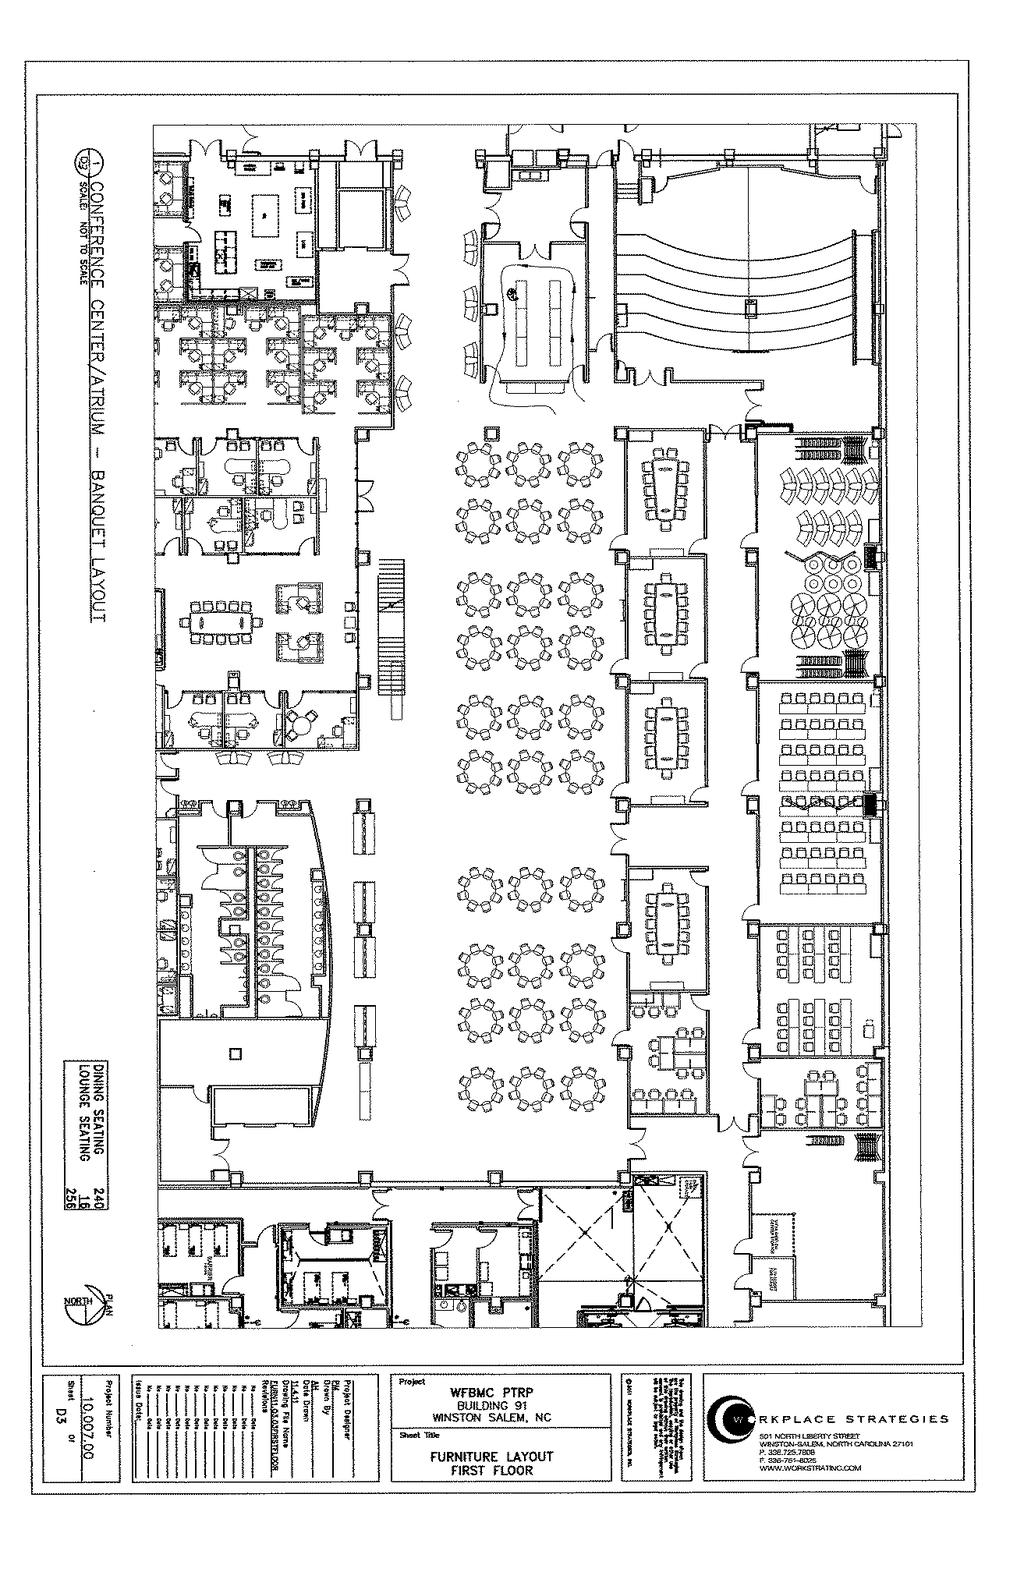 Dining Style Floorplan Max Occupancy: 275 (Tables and Chairs)